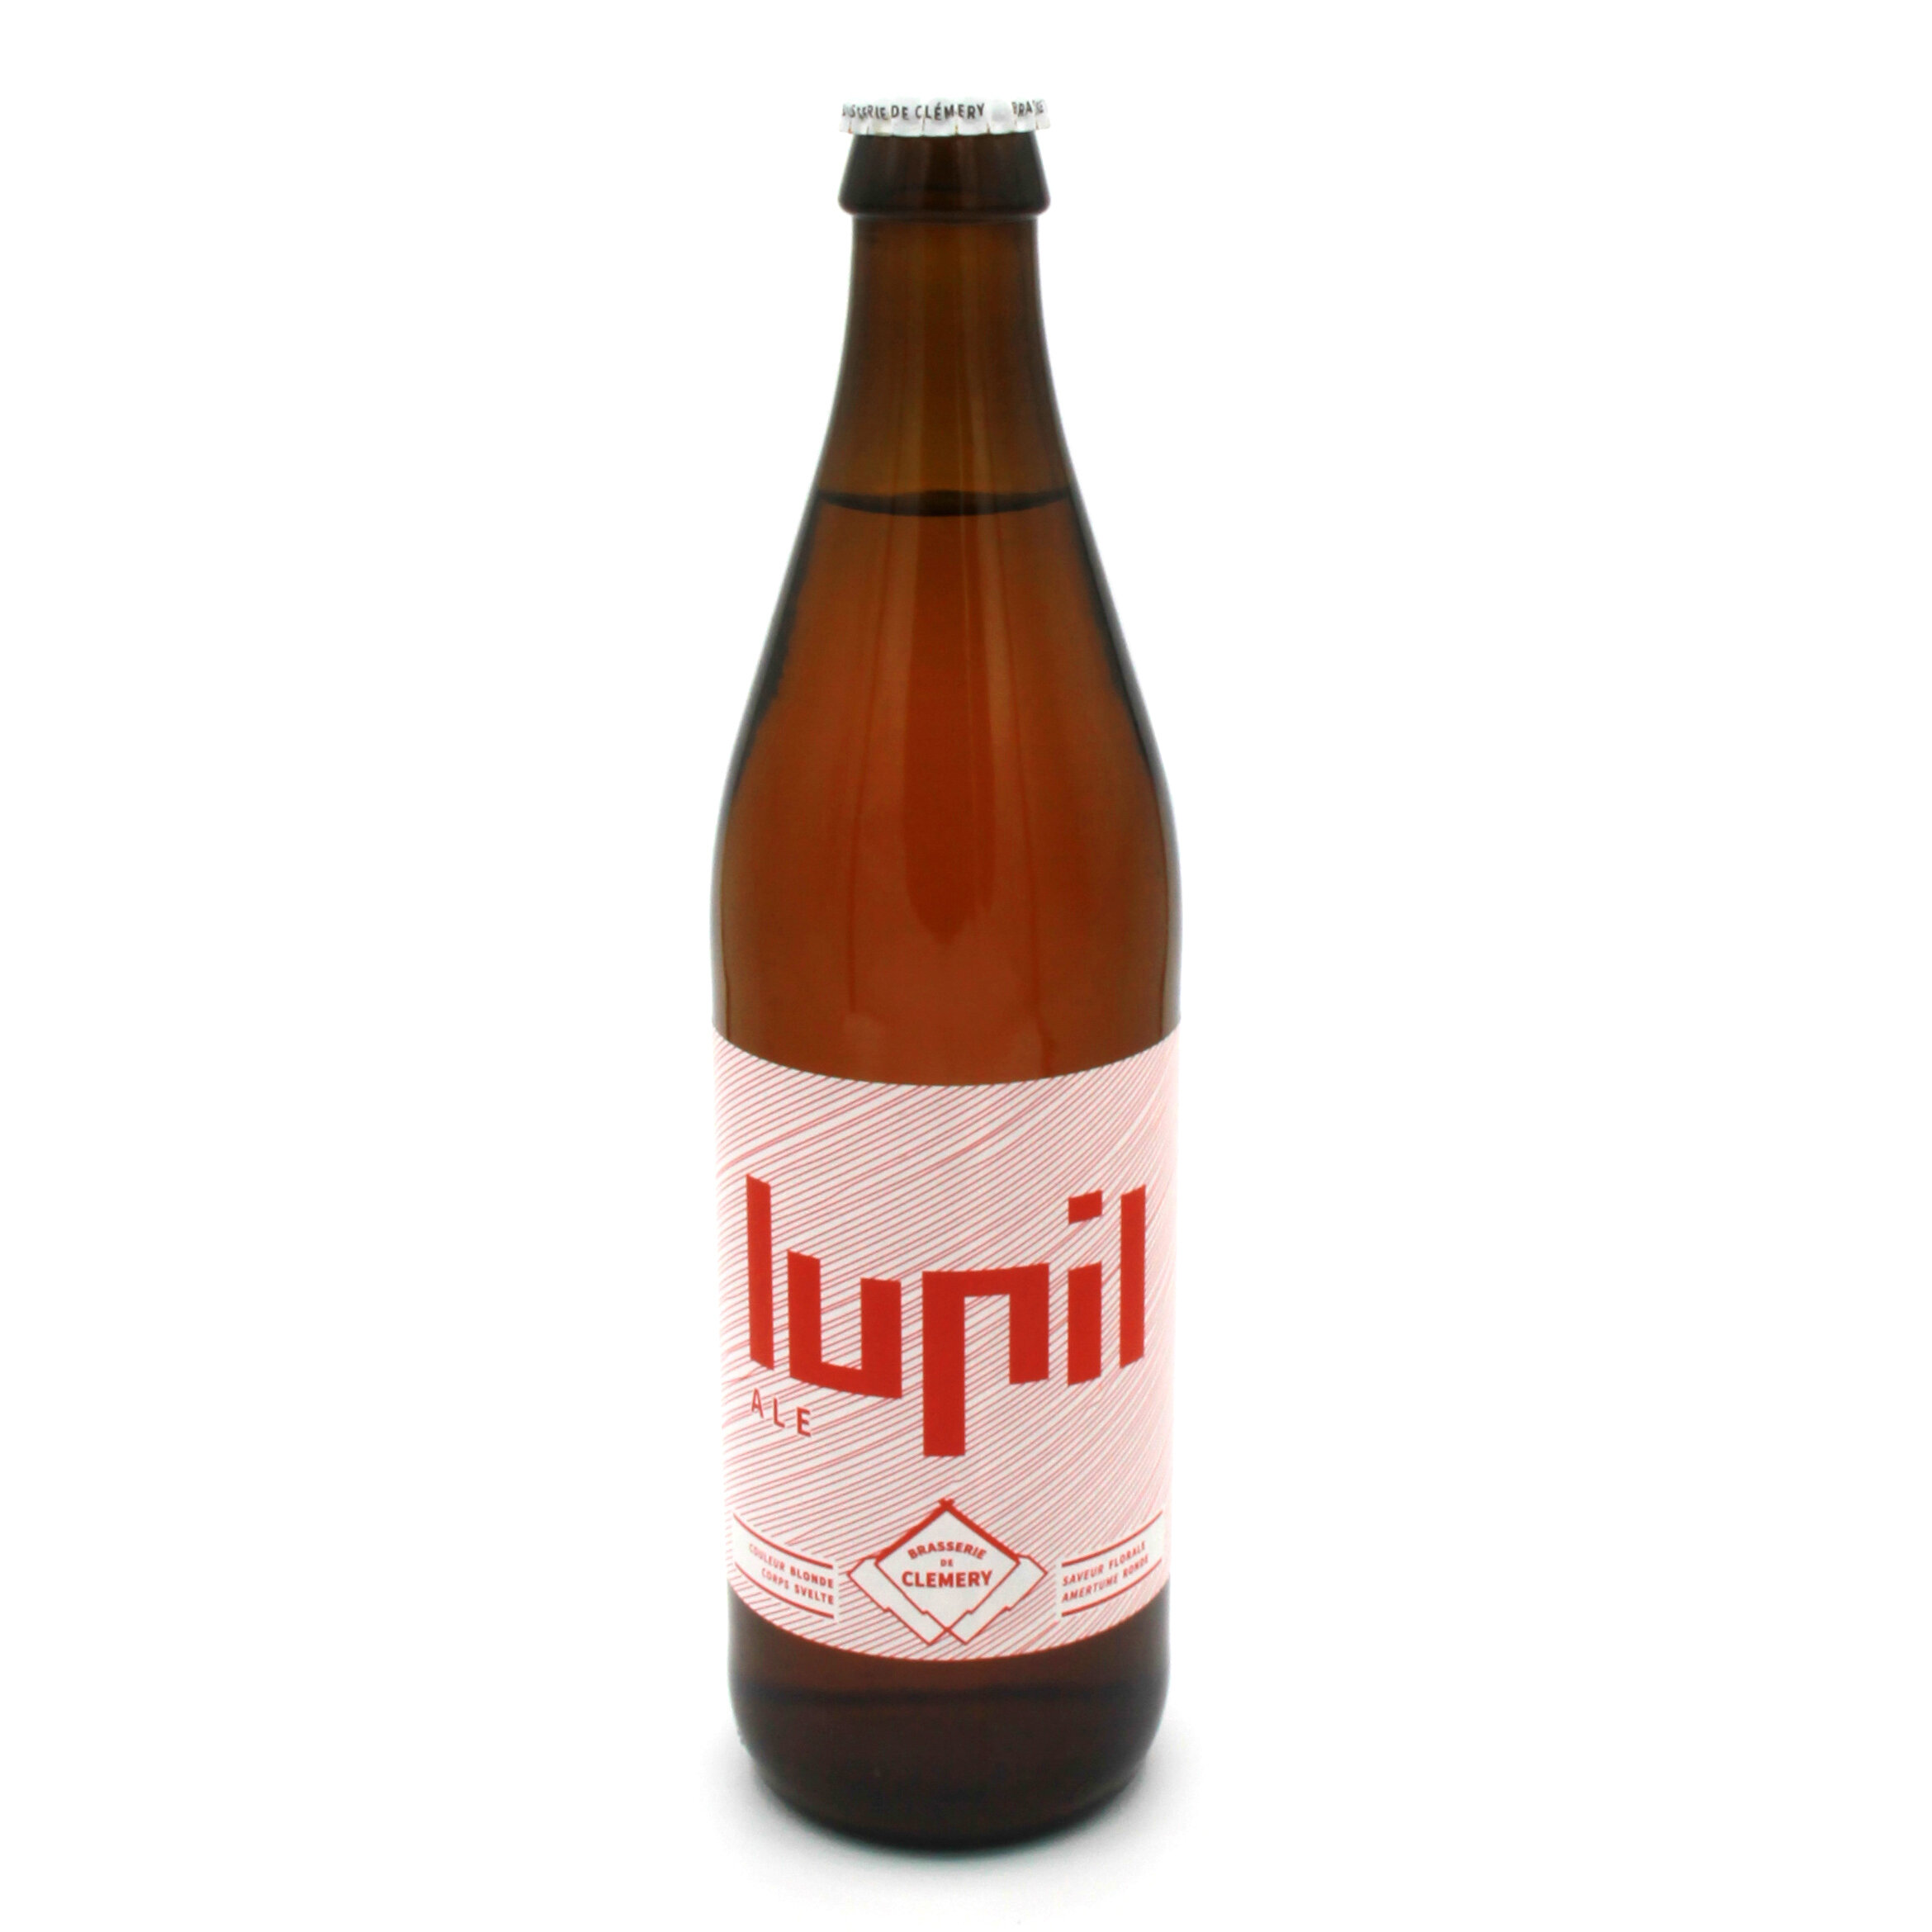 LUPIL ALE BRASSERIE CLEMERY 5.5% 50CL